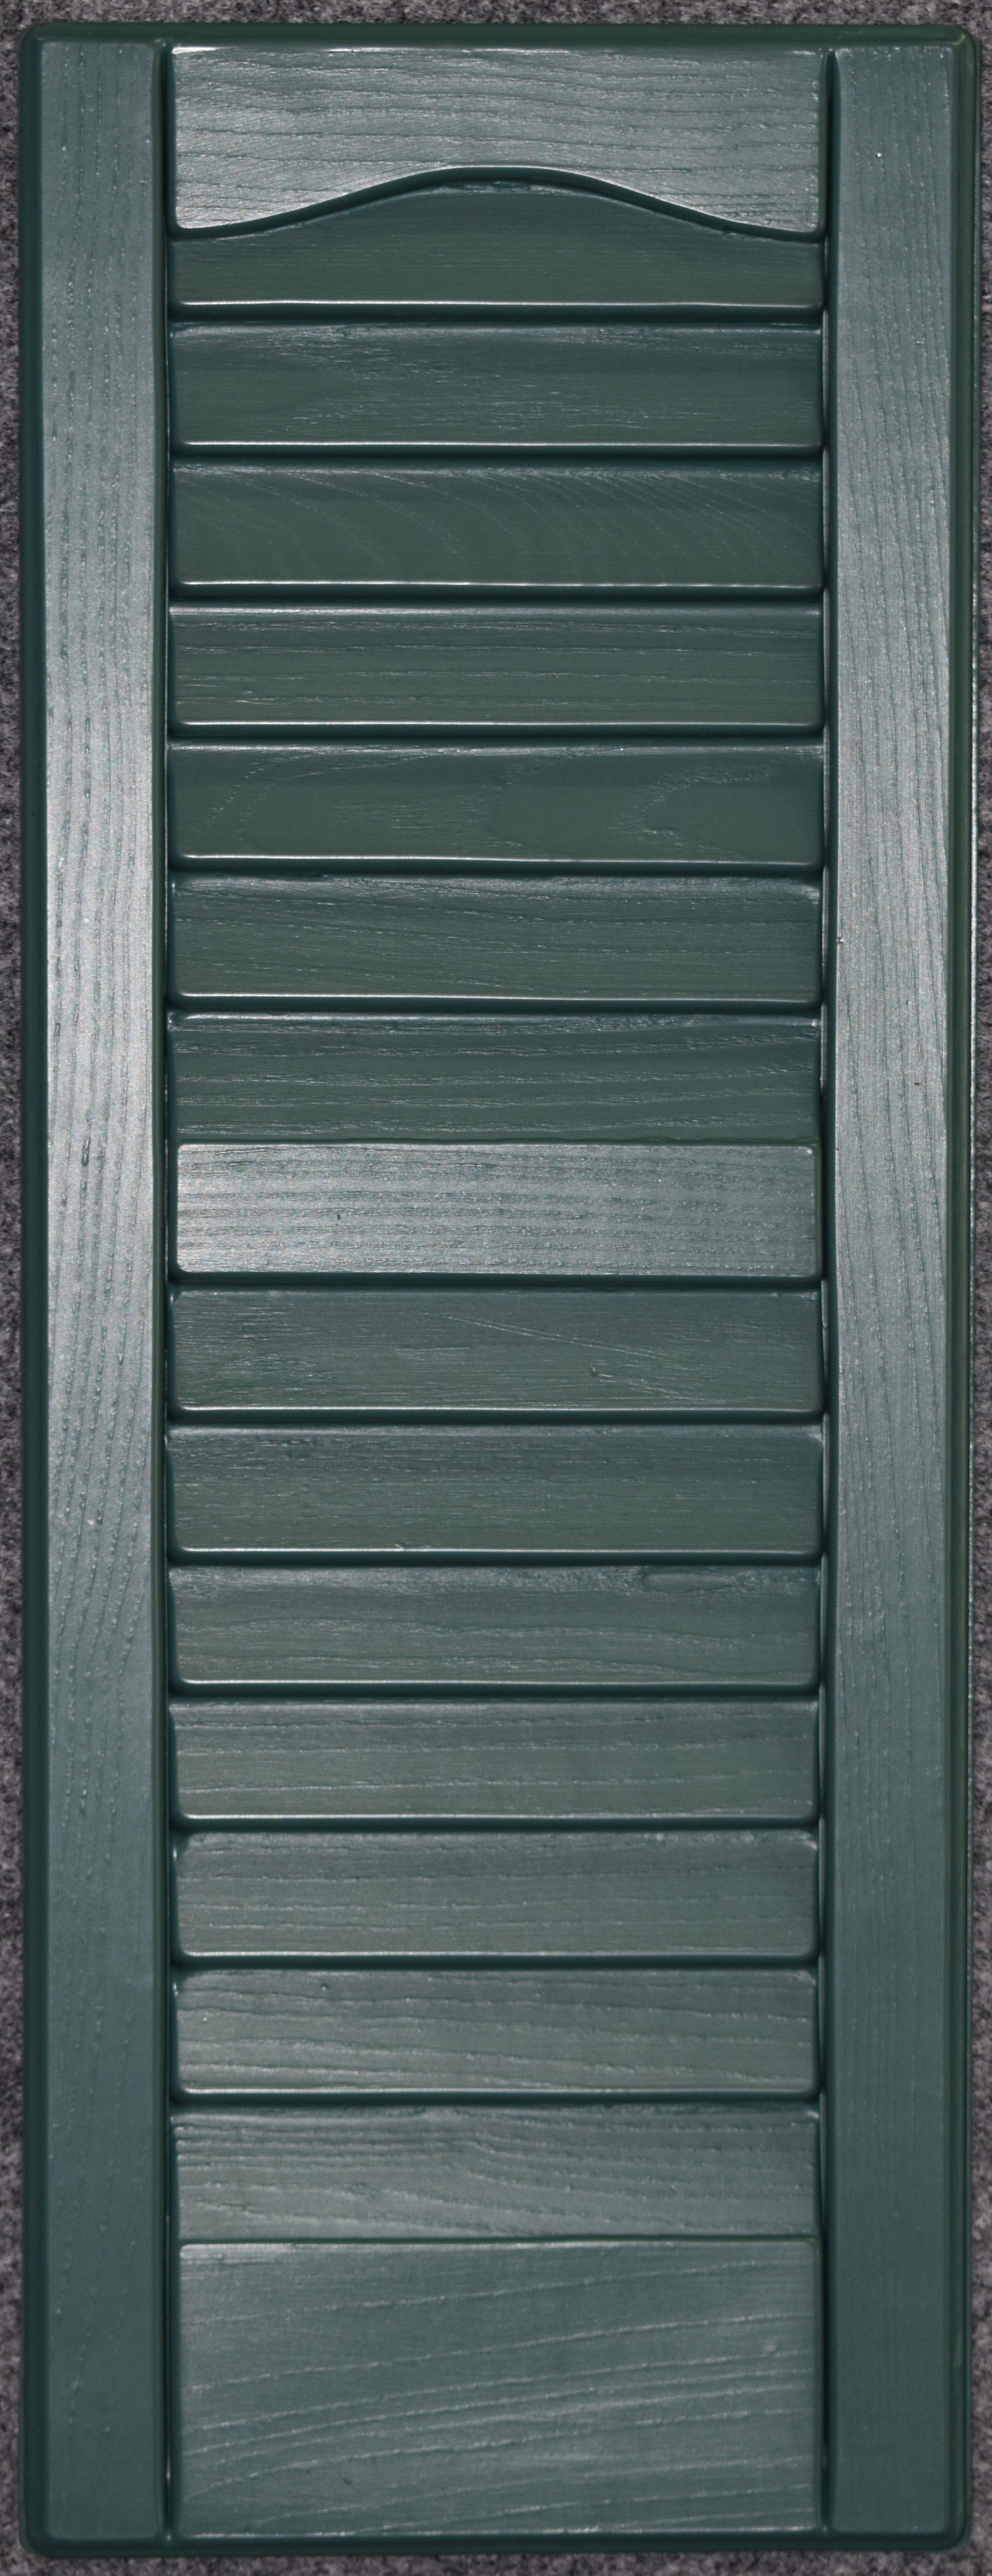 L1239gn-fh 12 X 39 In. Louvered Exterior Decorative Shutters, Hunter Green